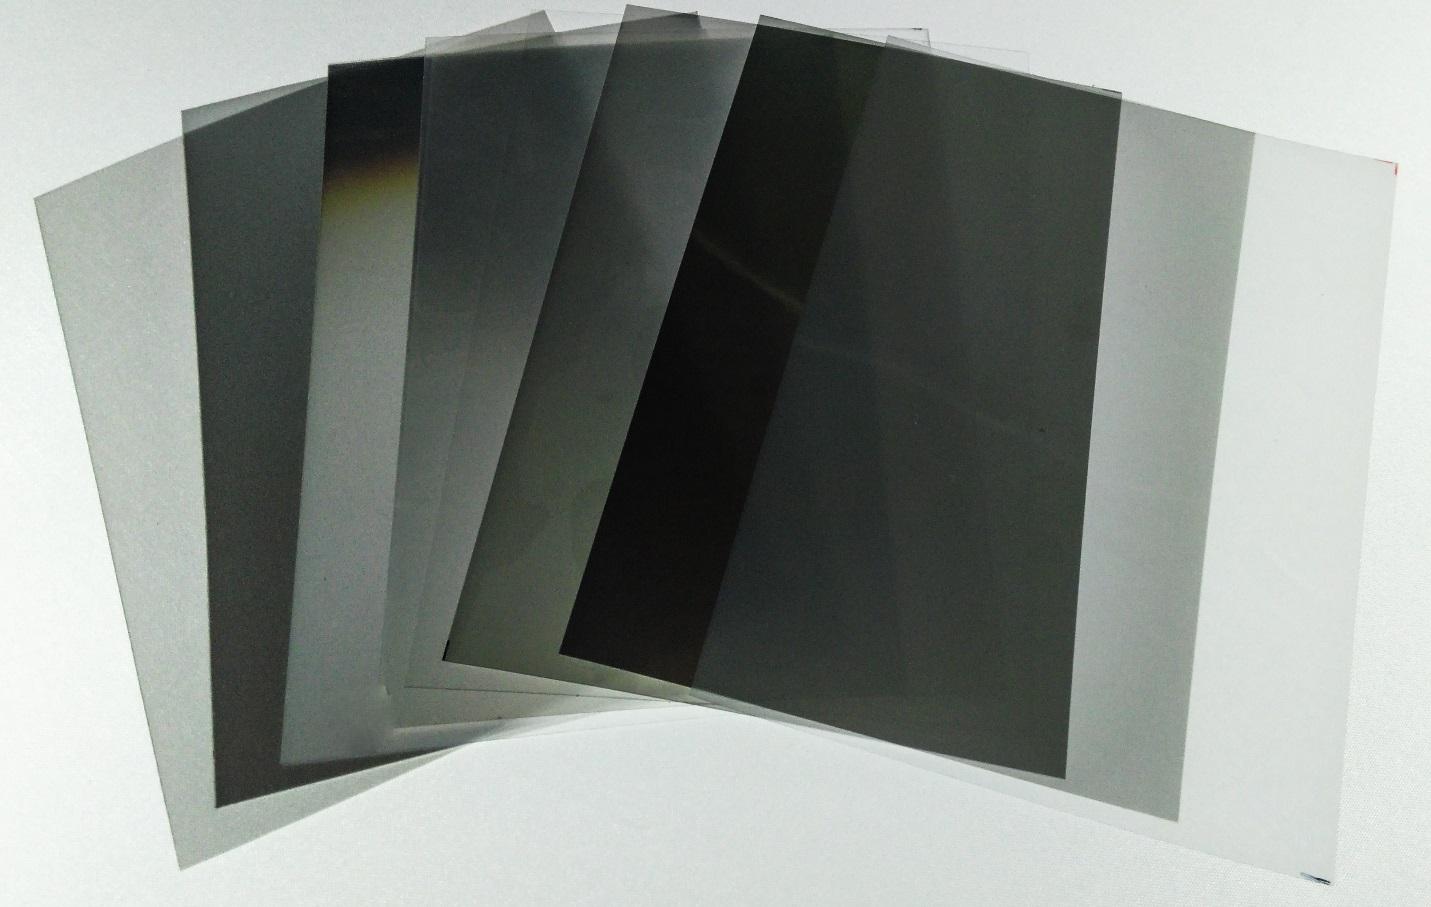 Selection of LCD film polarizers for privacy, high bright LCD enhancement, reflective, transflective or transmissive 